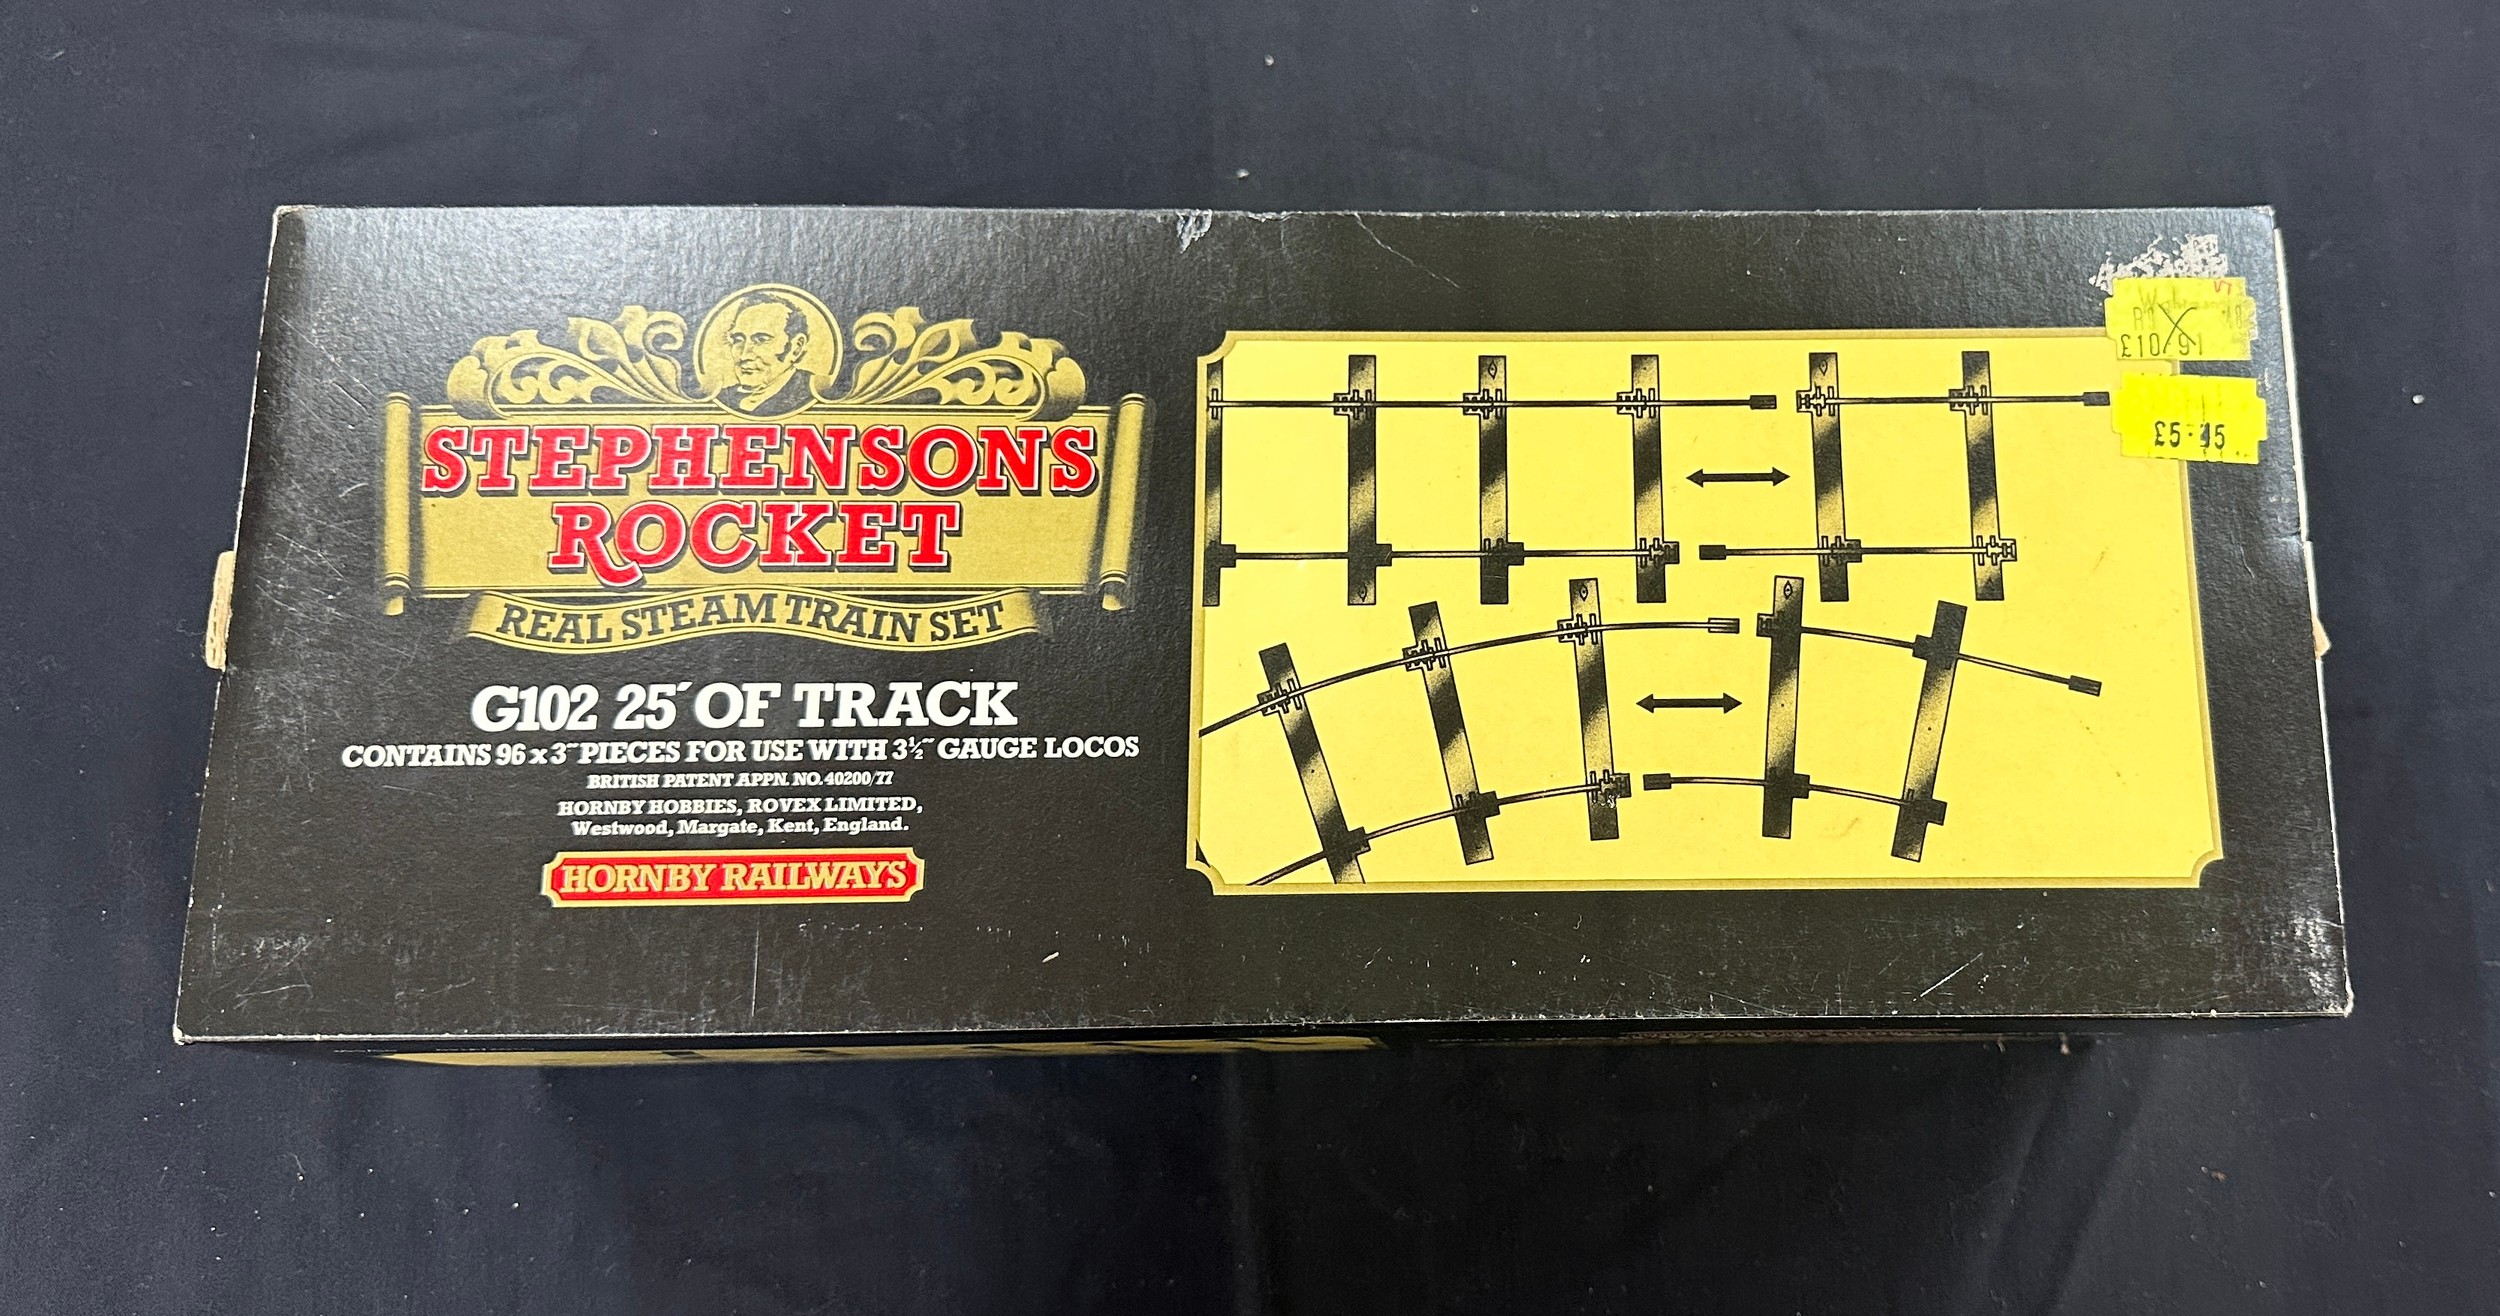 Hornby Stephensons Rocket real steam train track set G102 25 of track, Contains 96 x 3 pieces for - Image 2 of 4